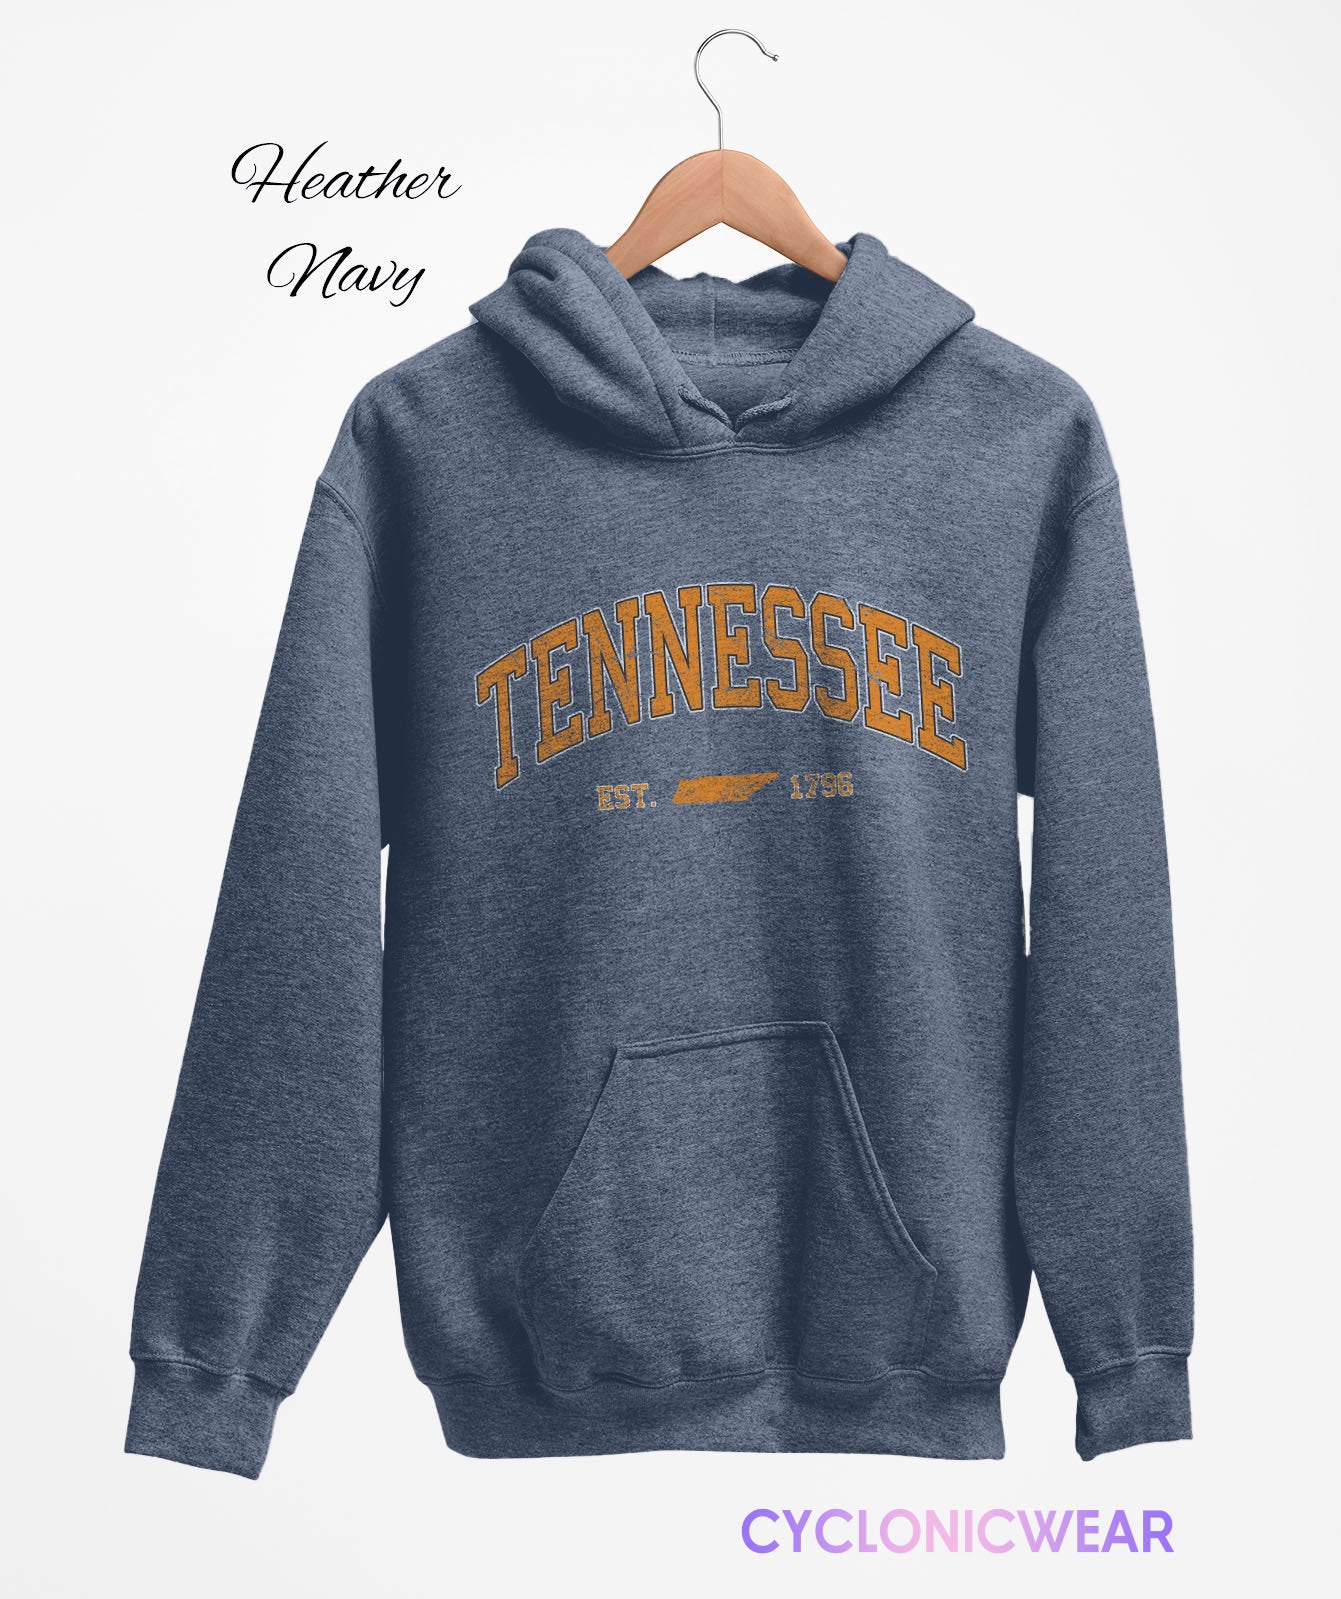 Vintage Tennessee Unisex Hoodie, Gift for Tennessee University